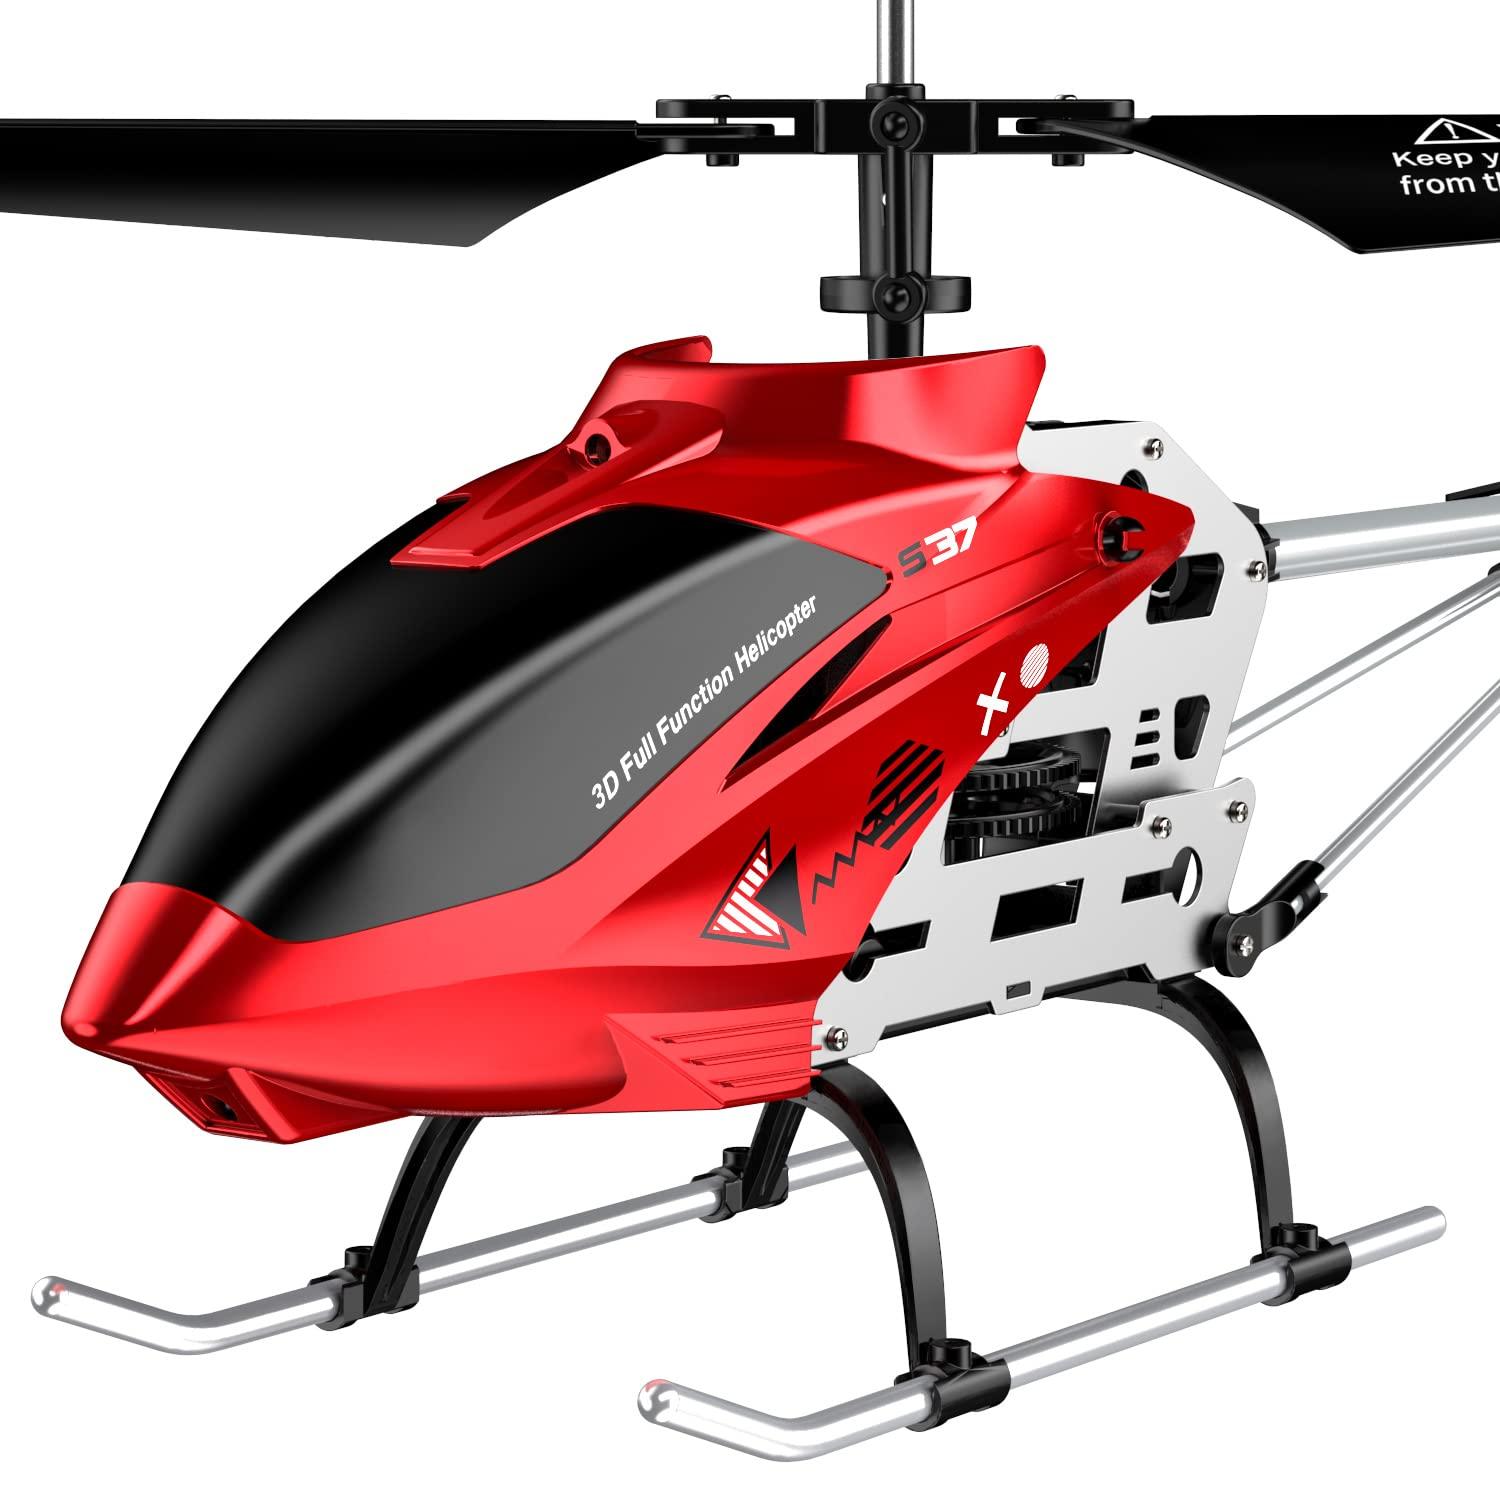 Syma S37 Rc Helicopter: Maintenance Tips for Syma S37 RC Helicopter